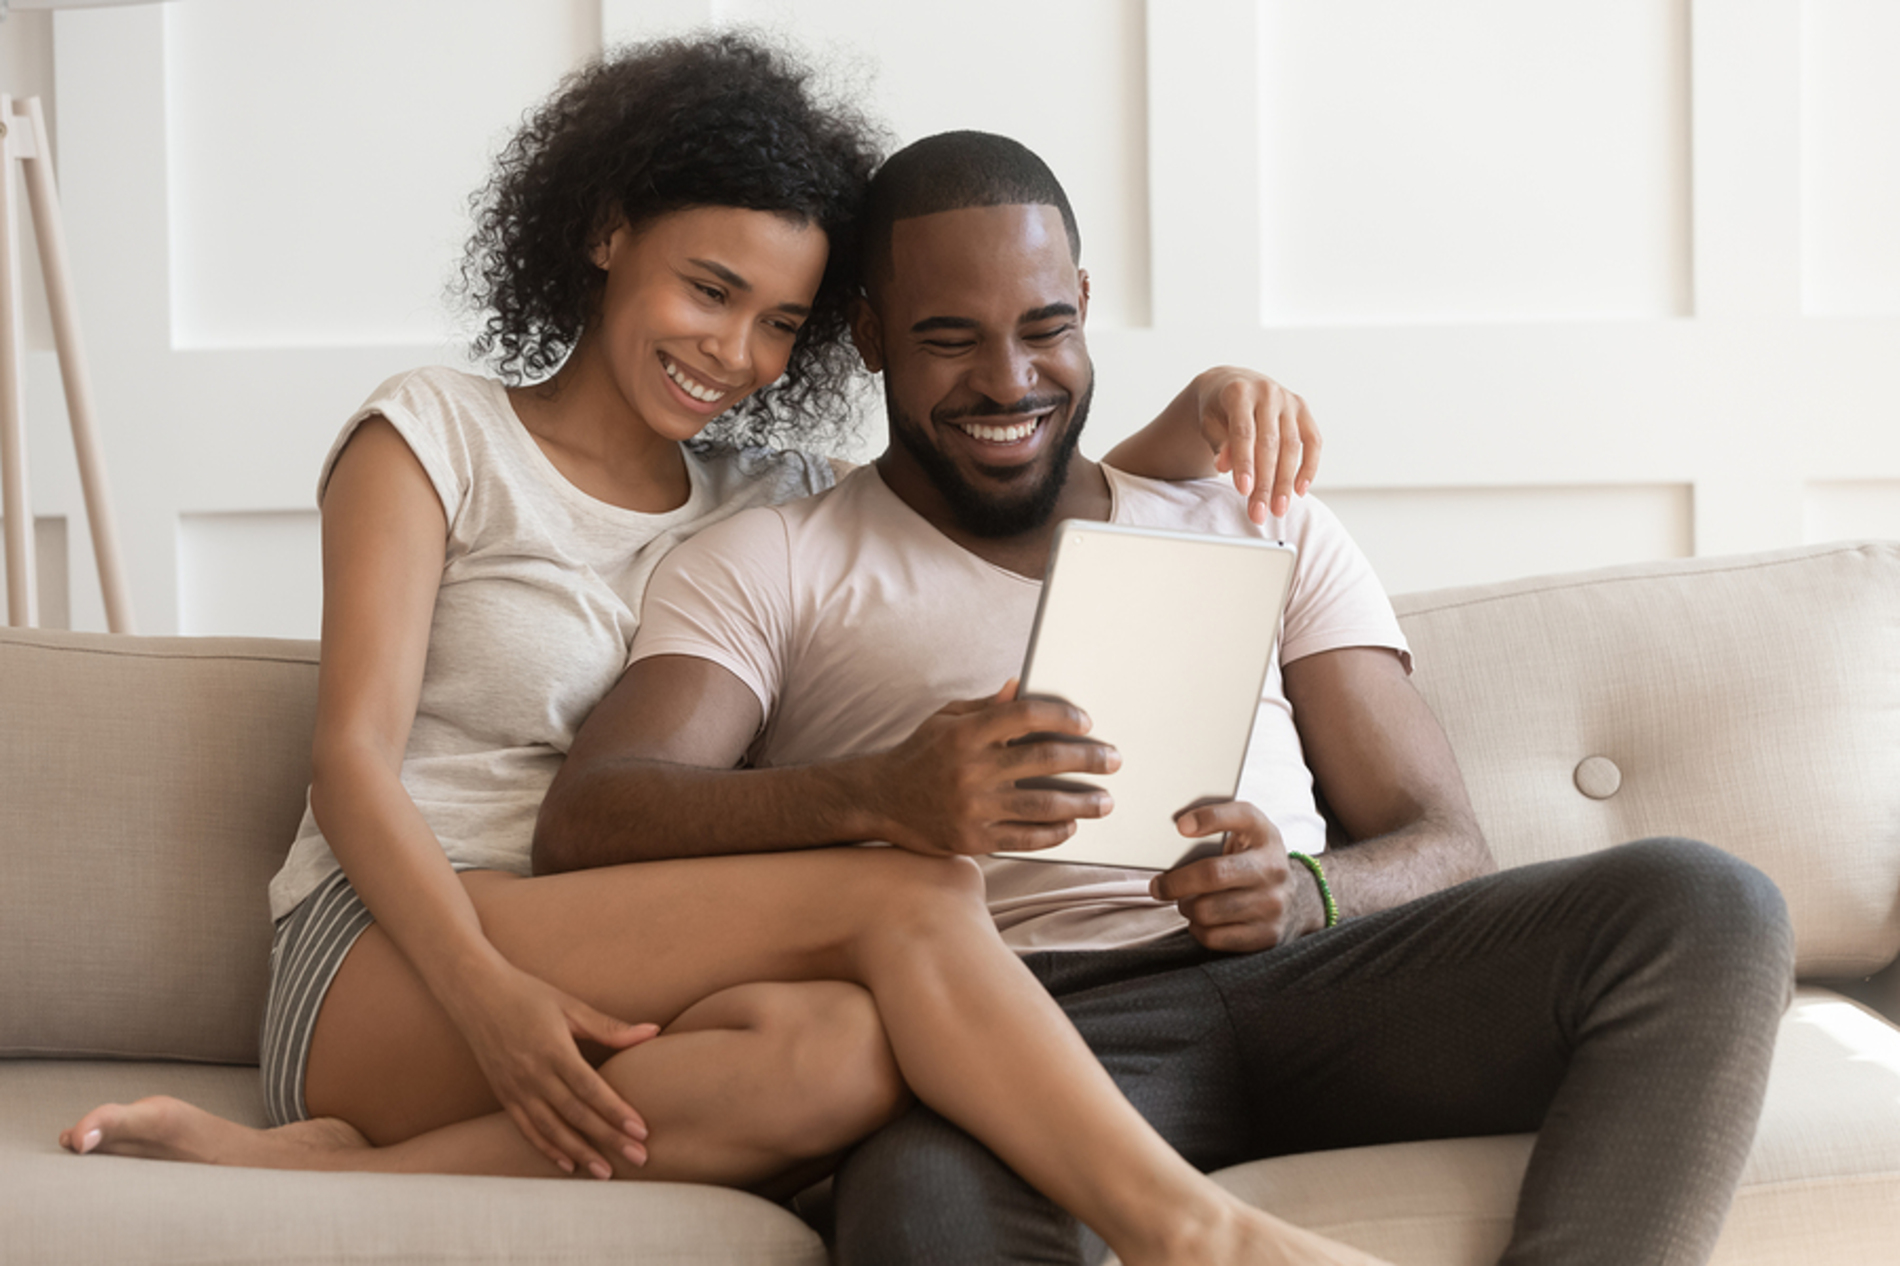 Happy couple sitting on a couch looking at a tablet screen together.